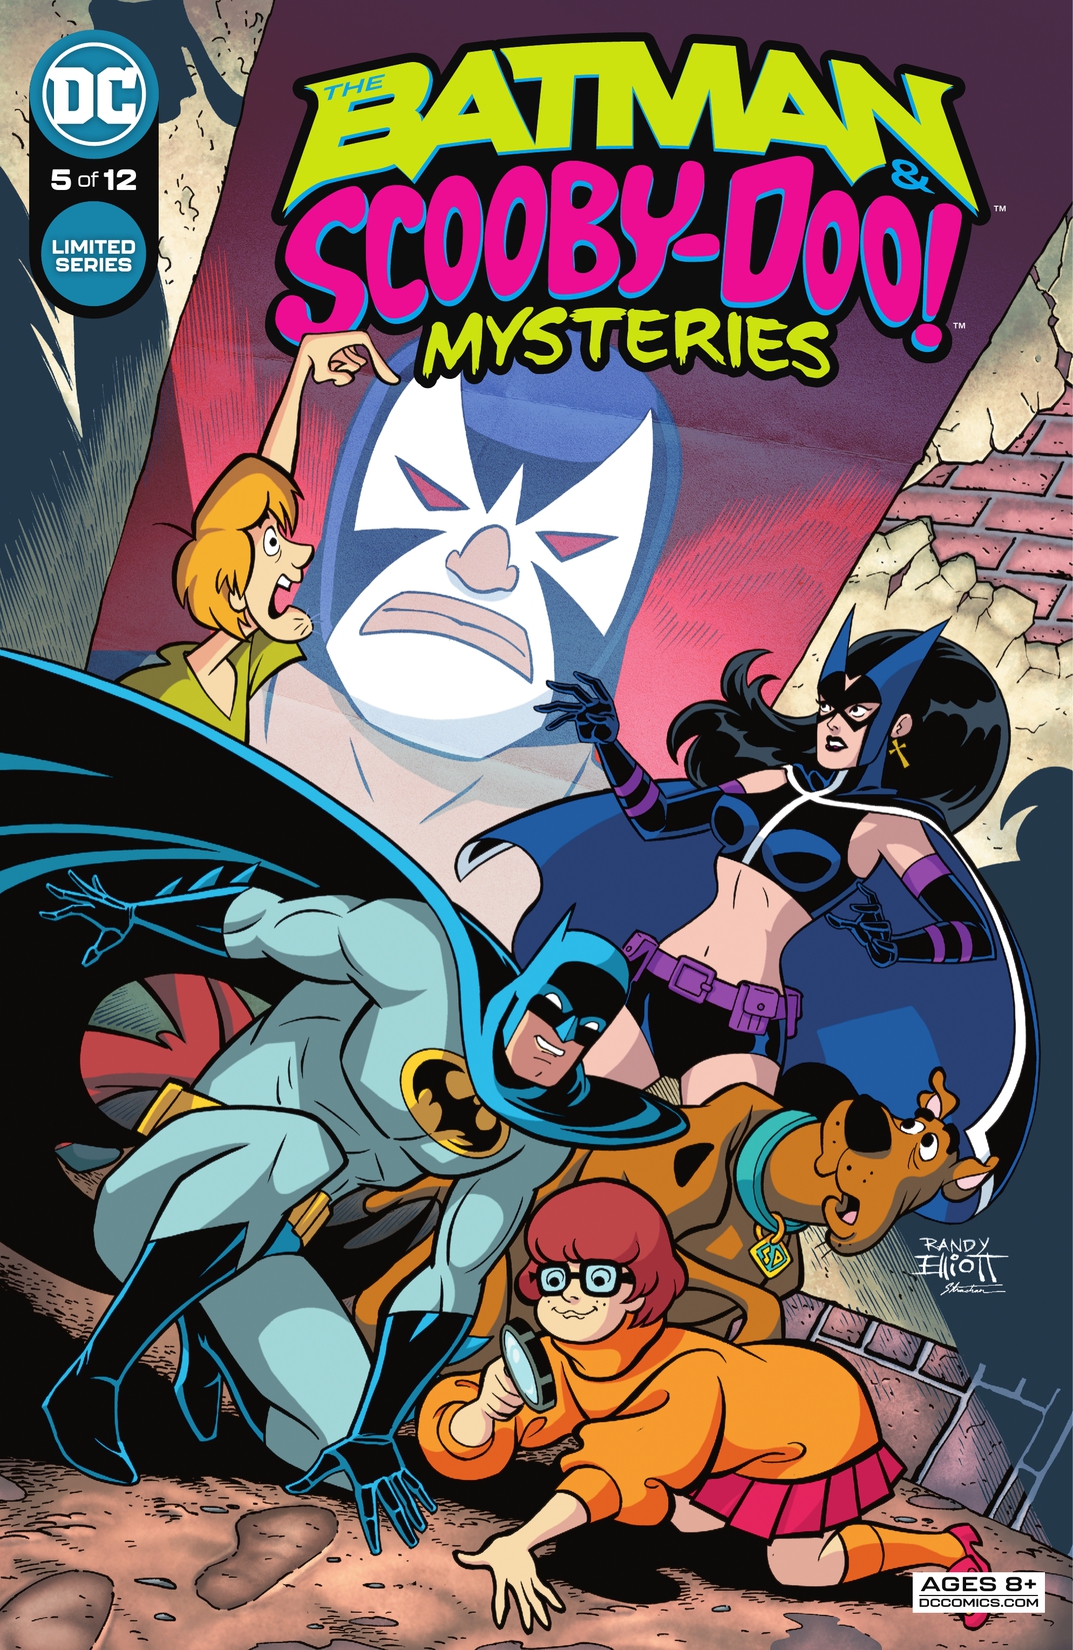 The Batman & Scooby-Doo Mysteries #5 preview images